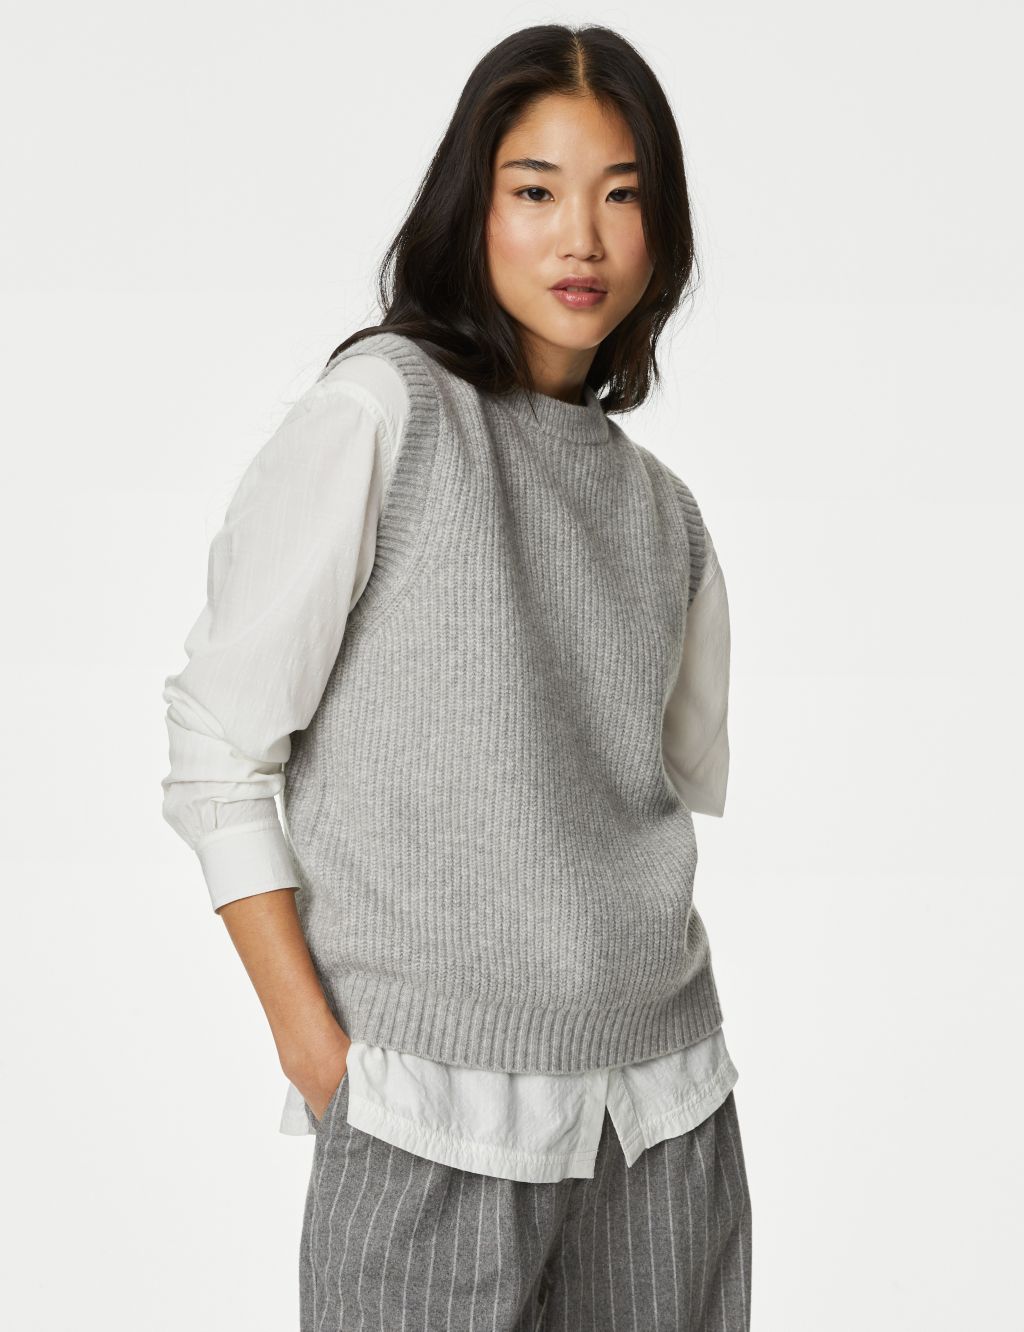 Air-Yarn Ribbed Crew Neck Knitted Vest image 1